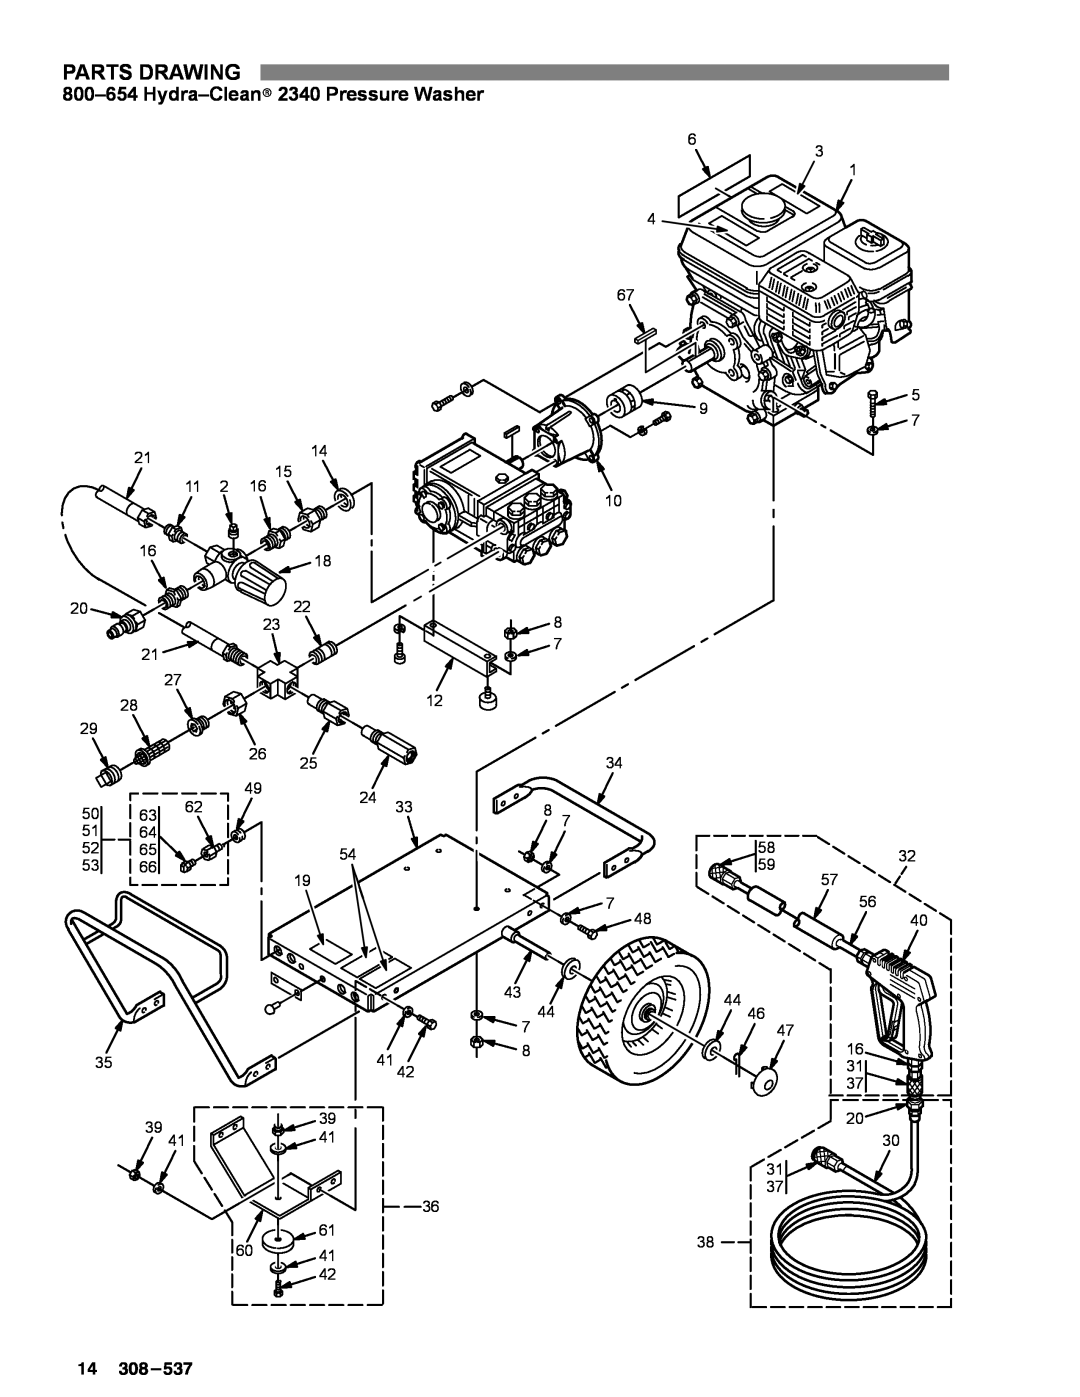 Graco Inc 800-717, 800-682, 800-654, 308-537, 1530, 1026 manual Parts Drawing, Hydra-Cleanr 2340 Pressure Washer 